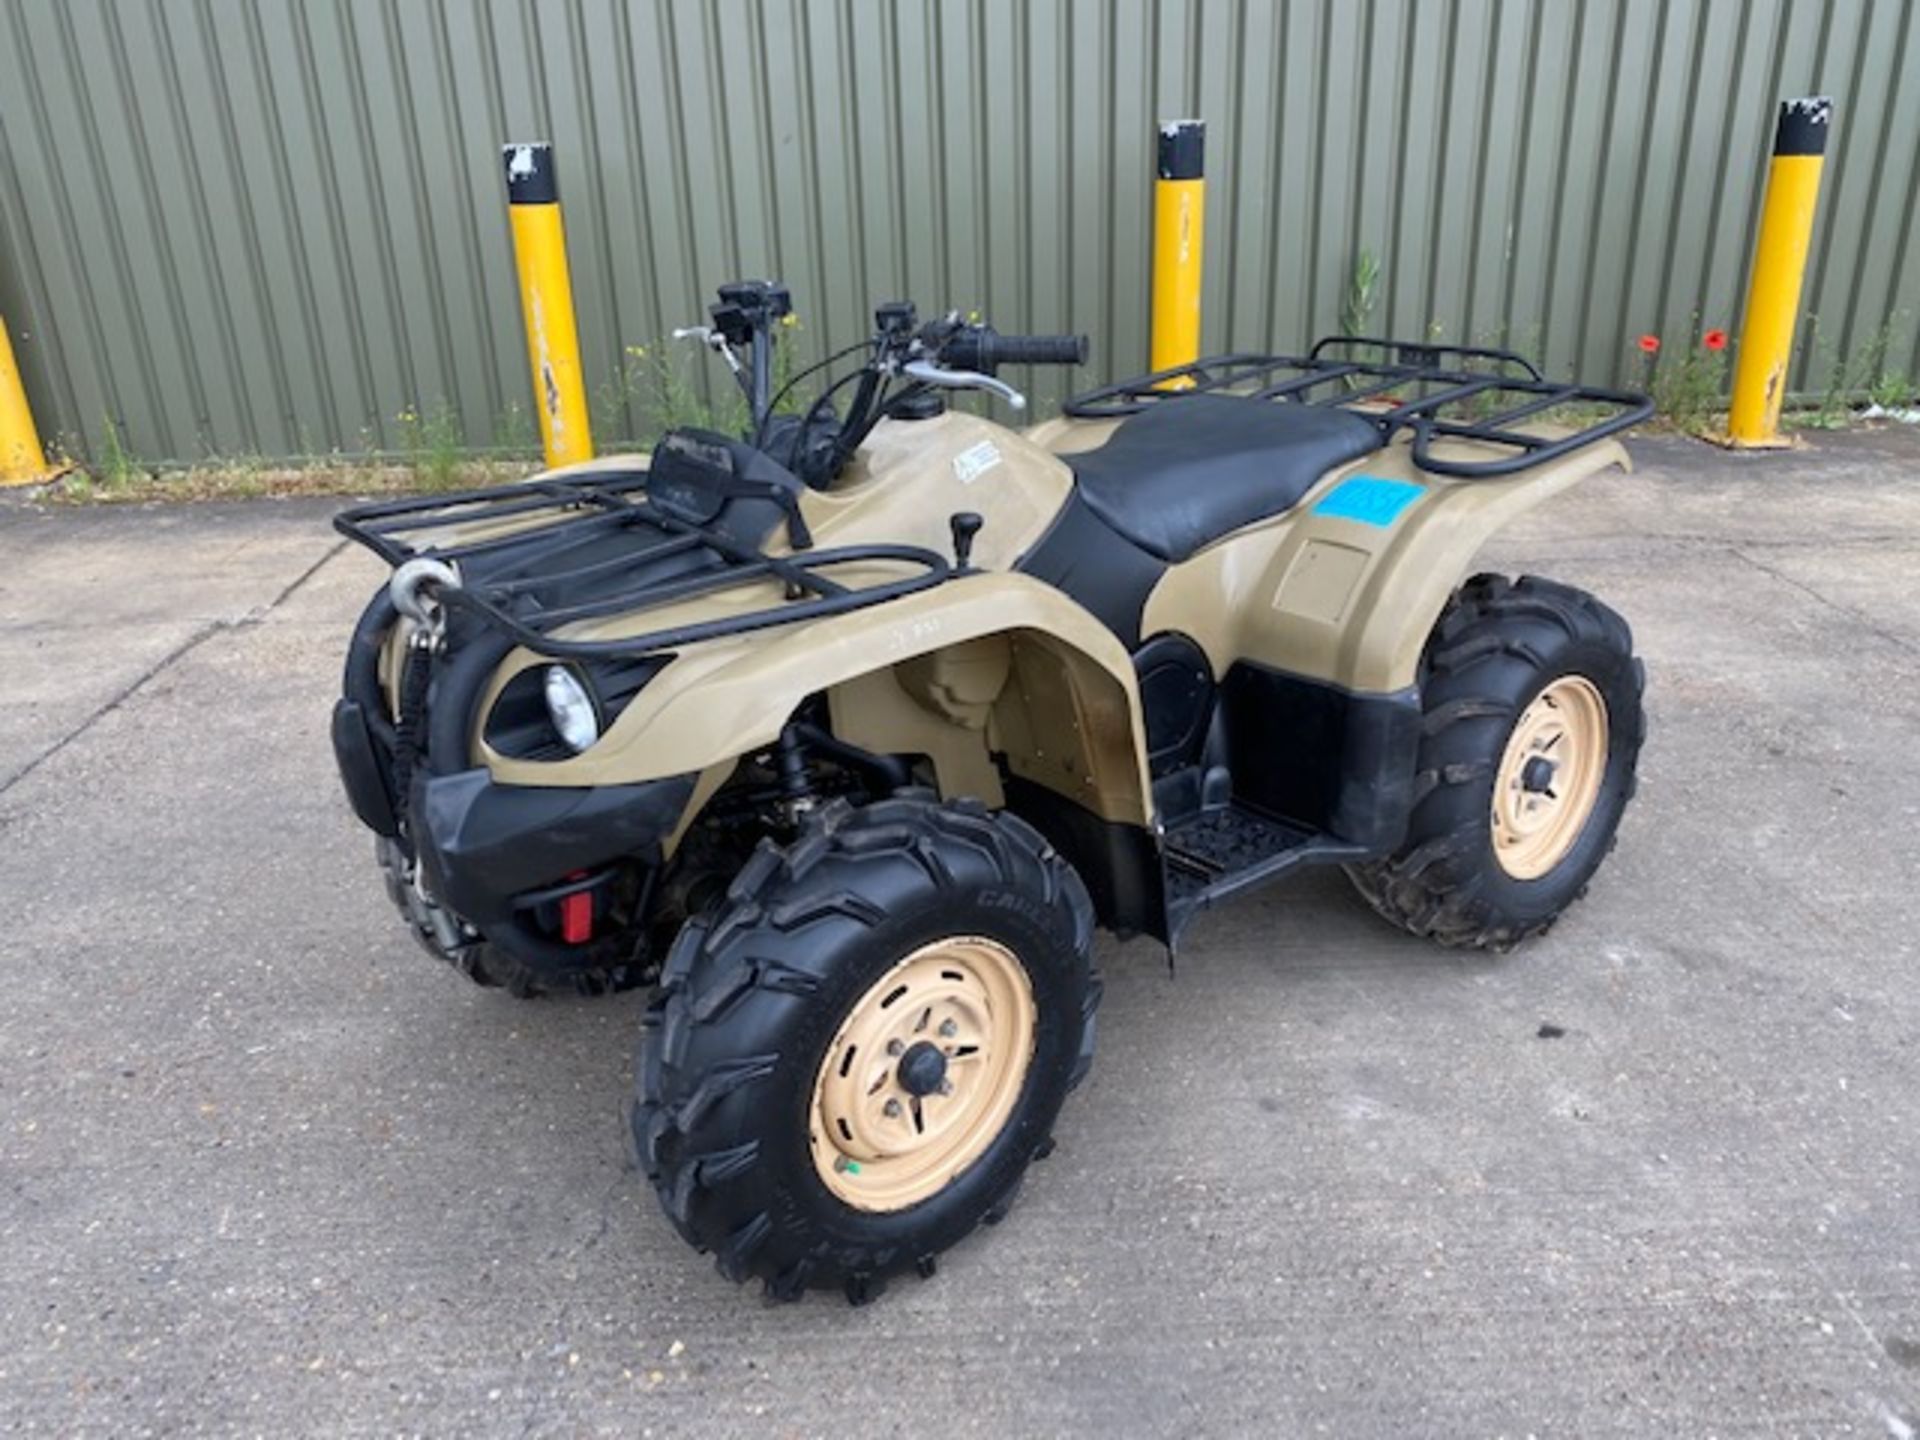 Military Specification Yamaha Grizzly 450 4 x 4 ATV Quad Bike ONLY 5,539Km!!! - Image 2 of 26